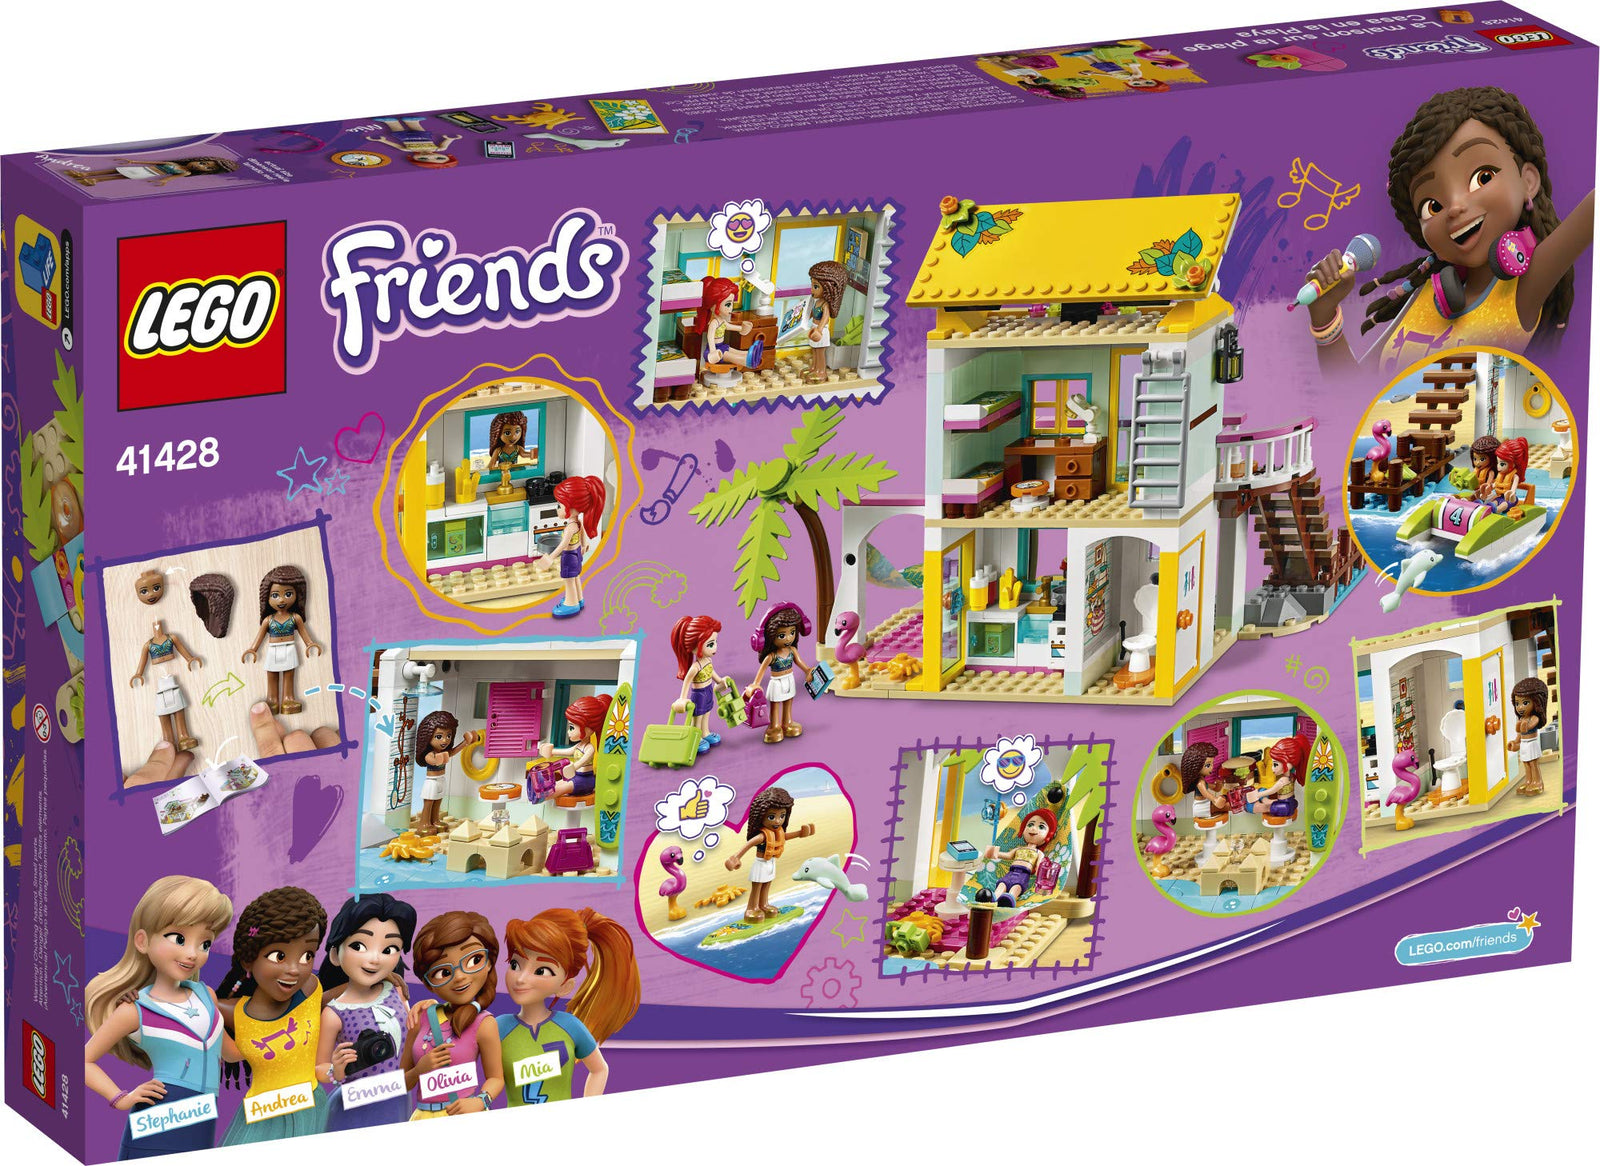 LEGO Friends Beach House 41428 Building Kit; Sparks Hours of Summer Adventure Play, New 2020 (444 Pieces)